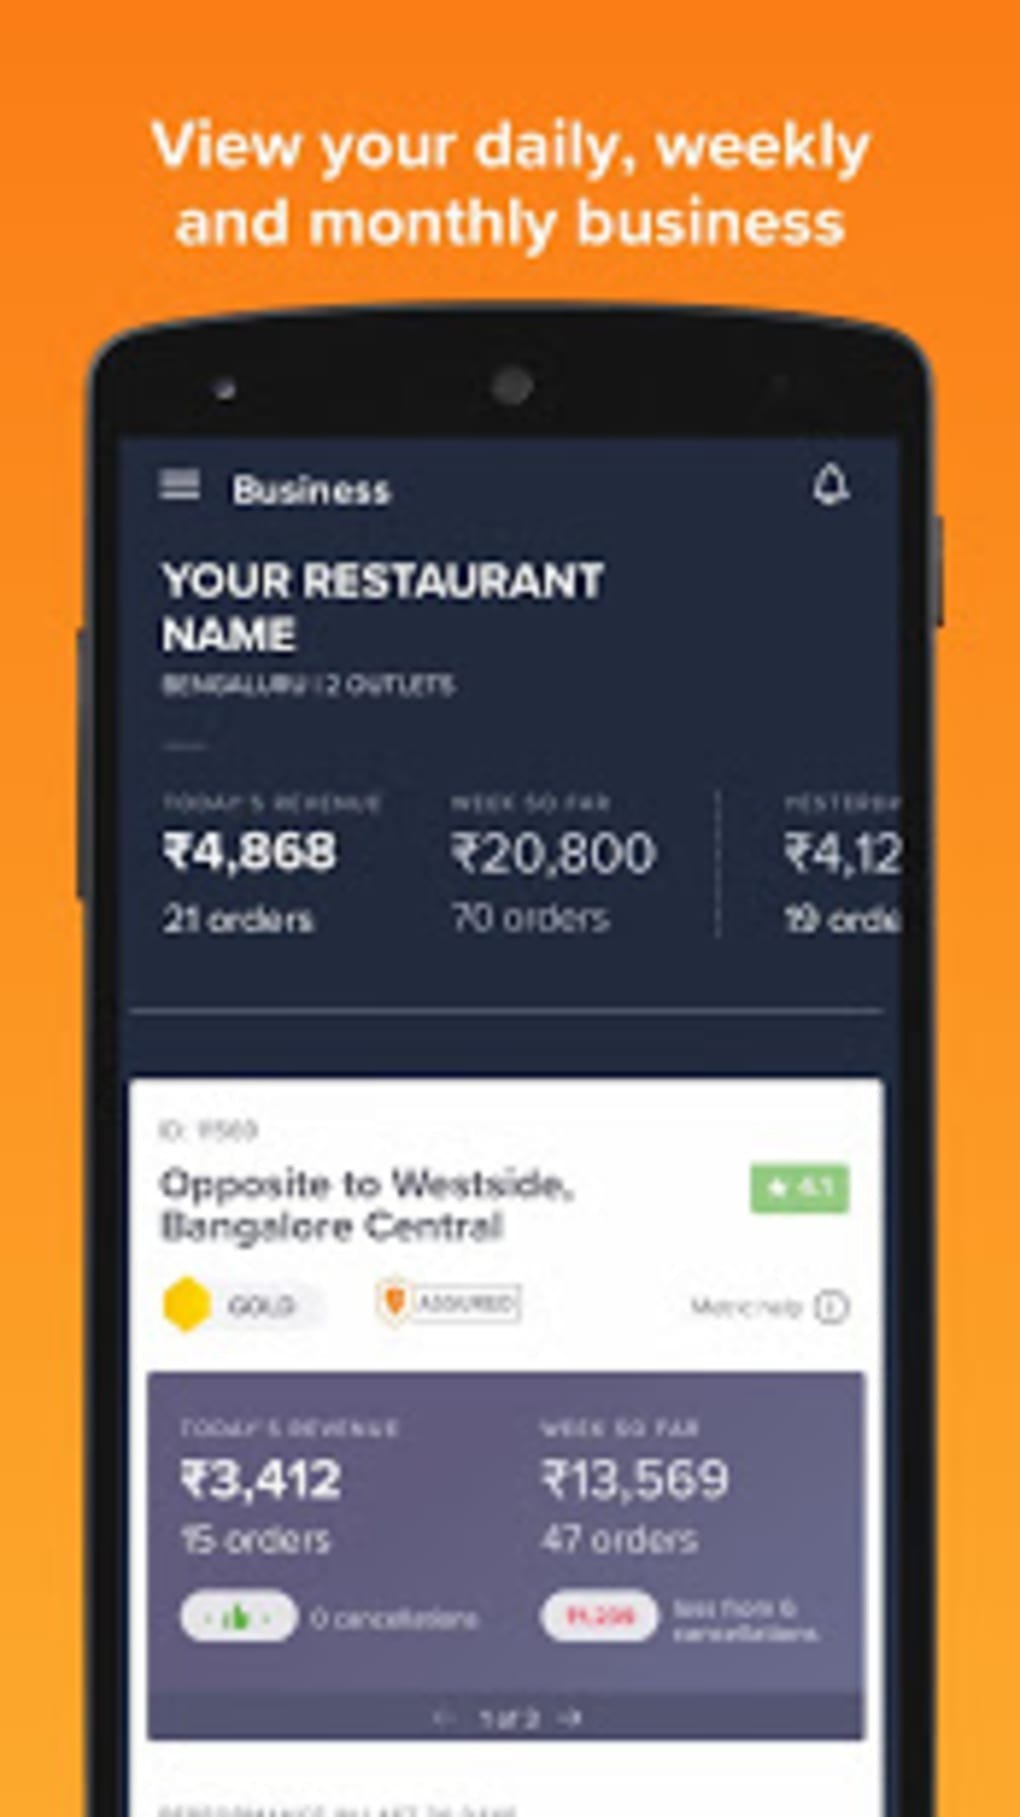 Swiggy Partner App for Android - Download